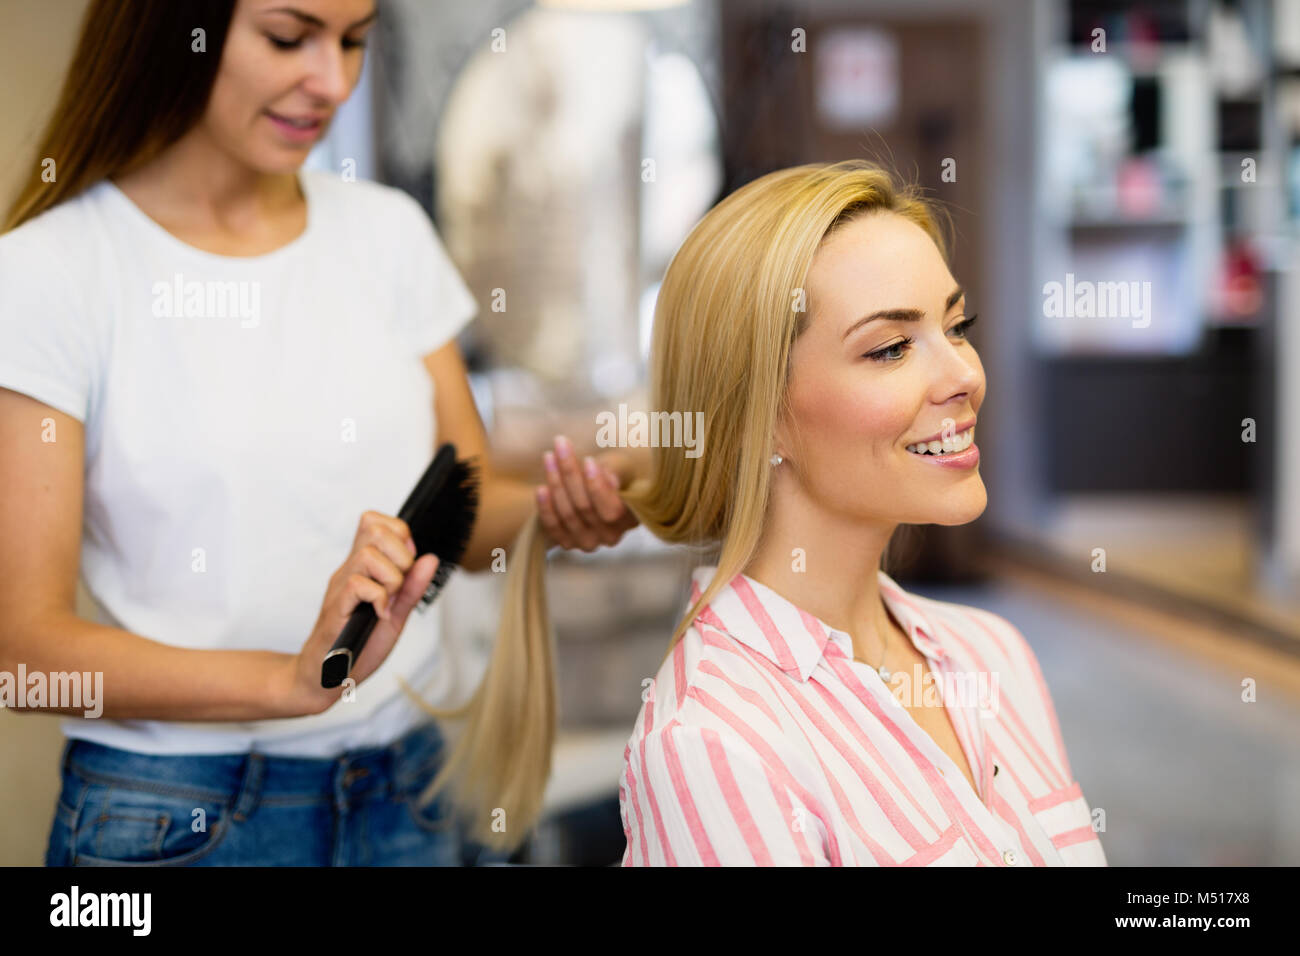 Happy woman at the hair salon Banque D'Images